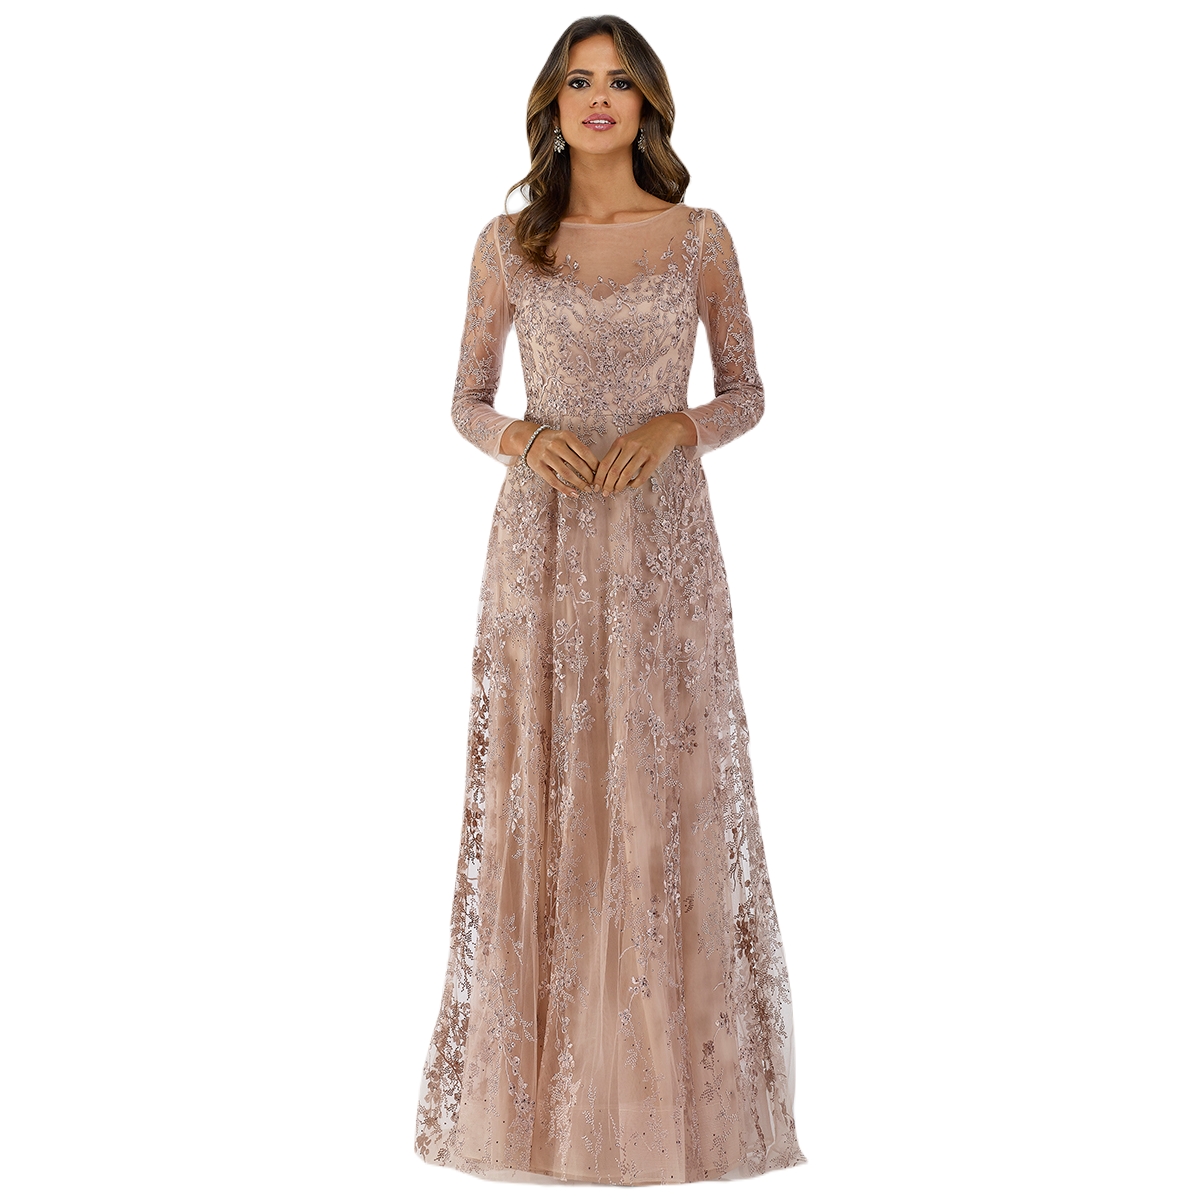 Women's Illusion Neckline A-line Long Sleeves Gown - Blush